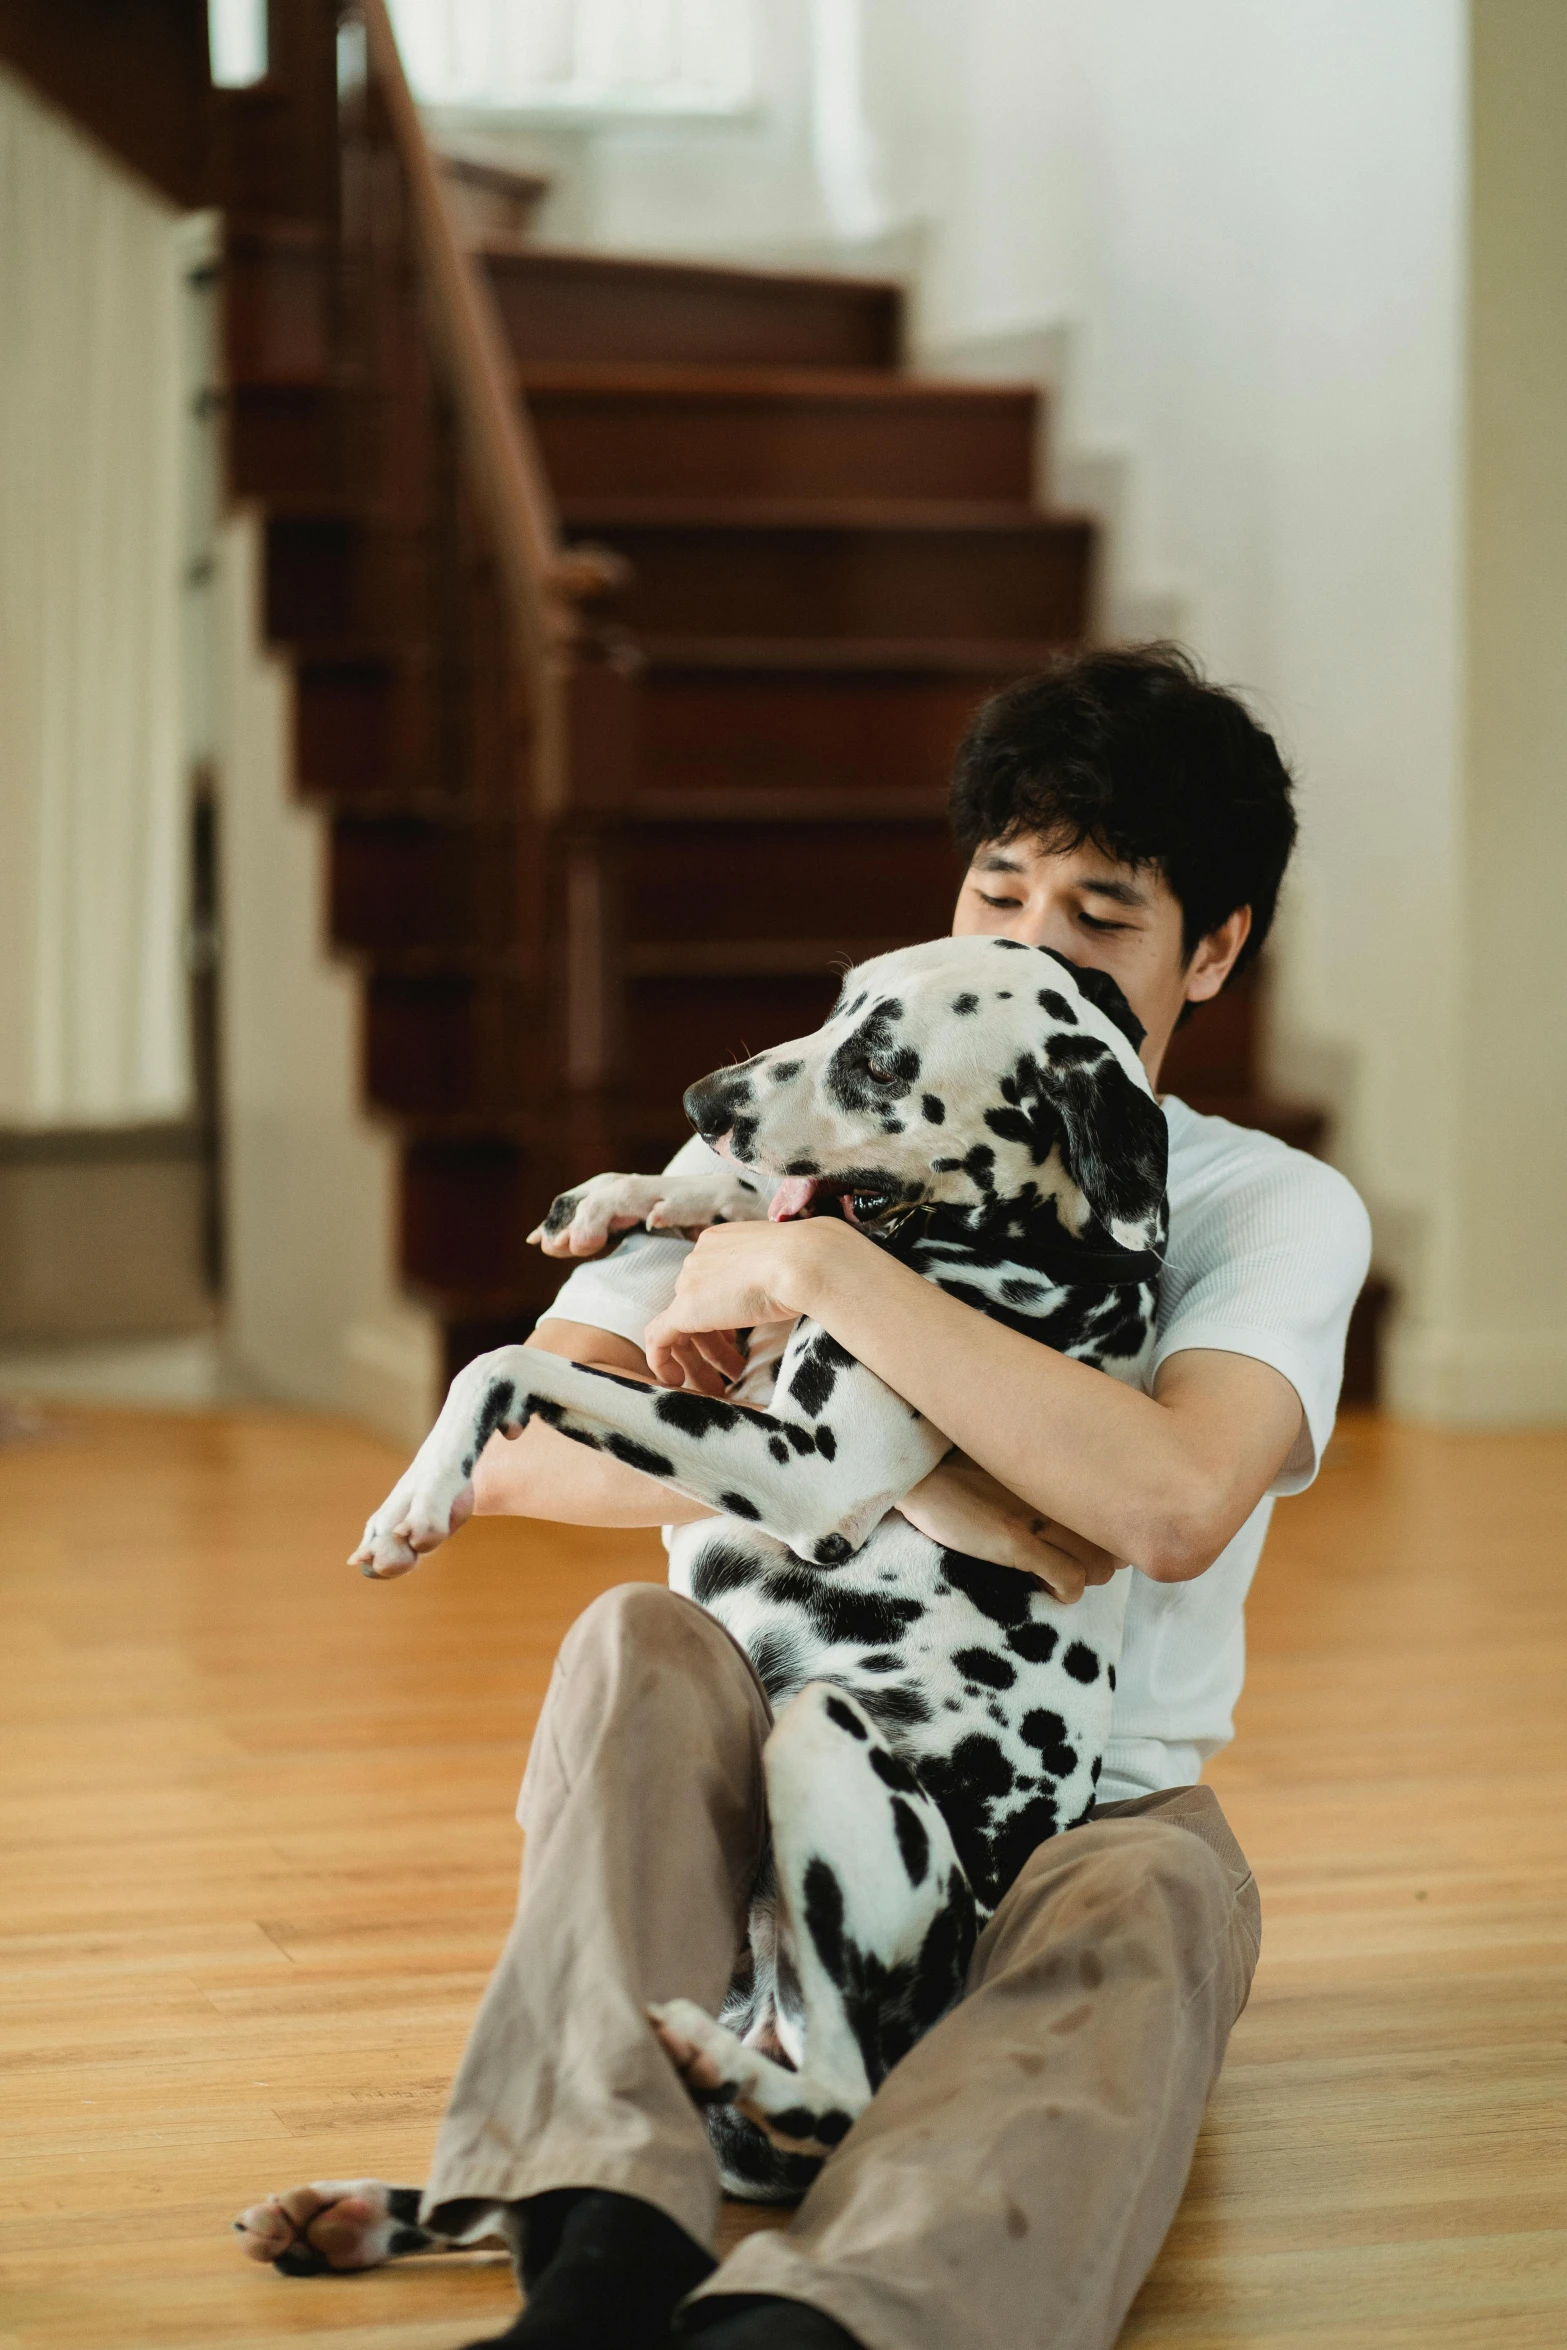 the boy is holding a dog wrapped in cow print